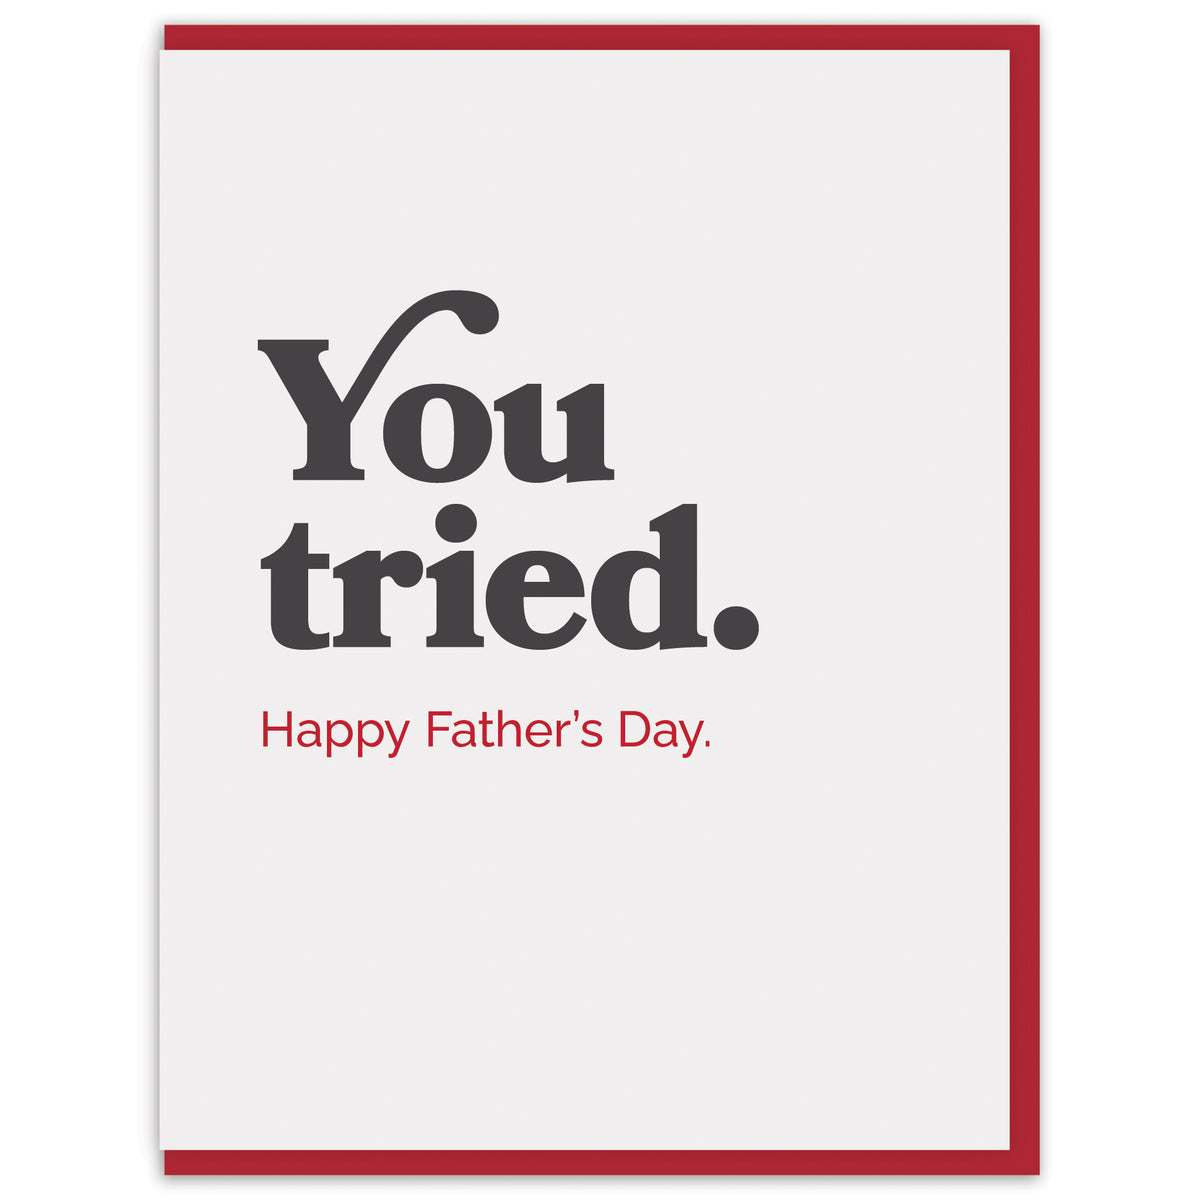 You tried. Happy Father&#39;s Day.